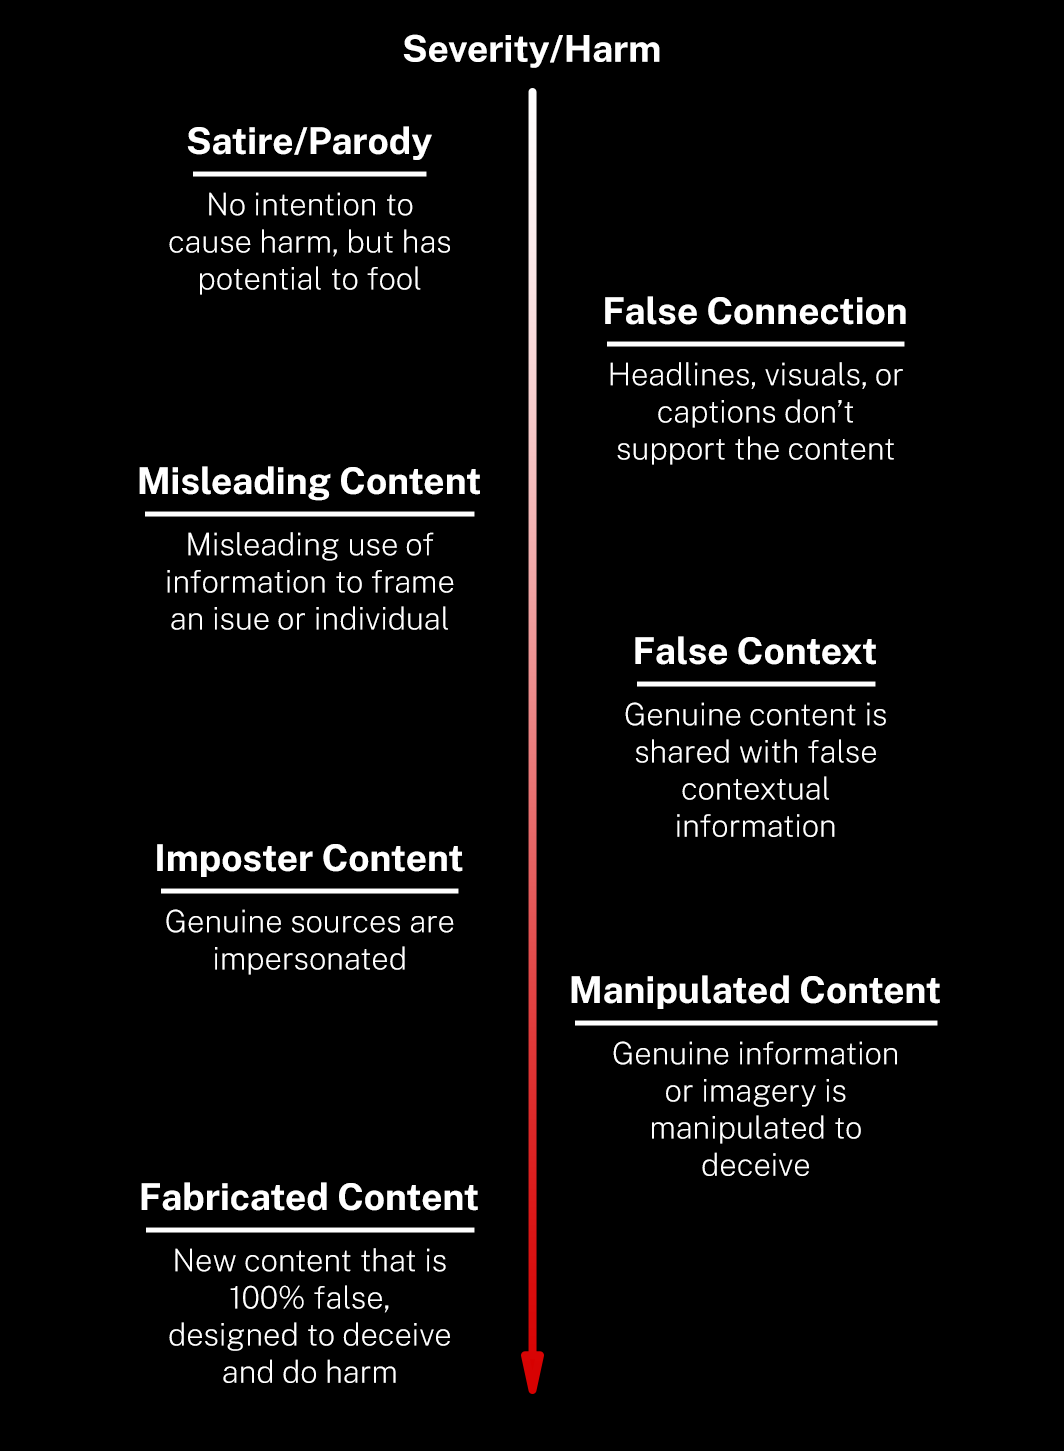 Types of Mis-, Dis-, and Malinformation